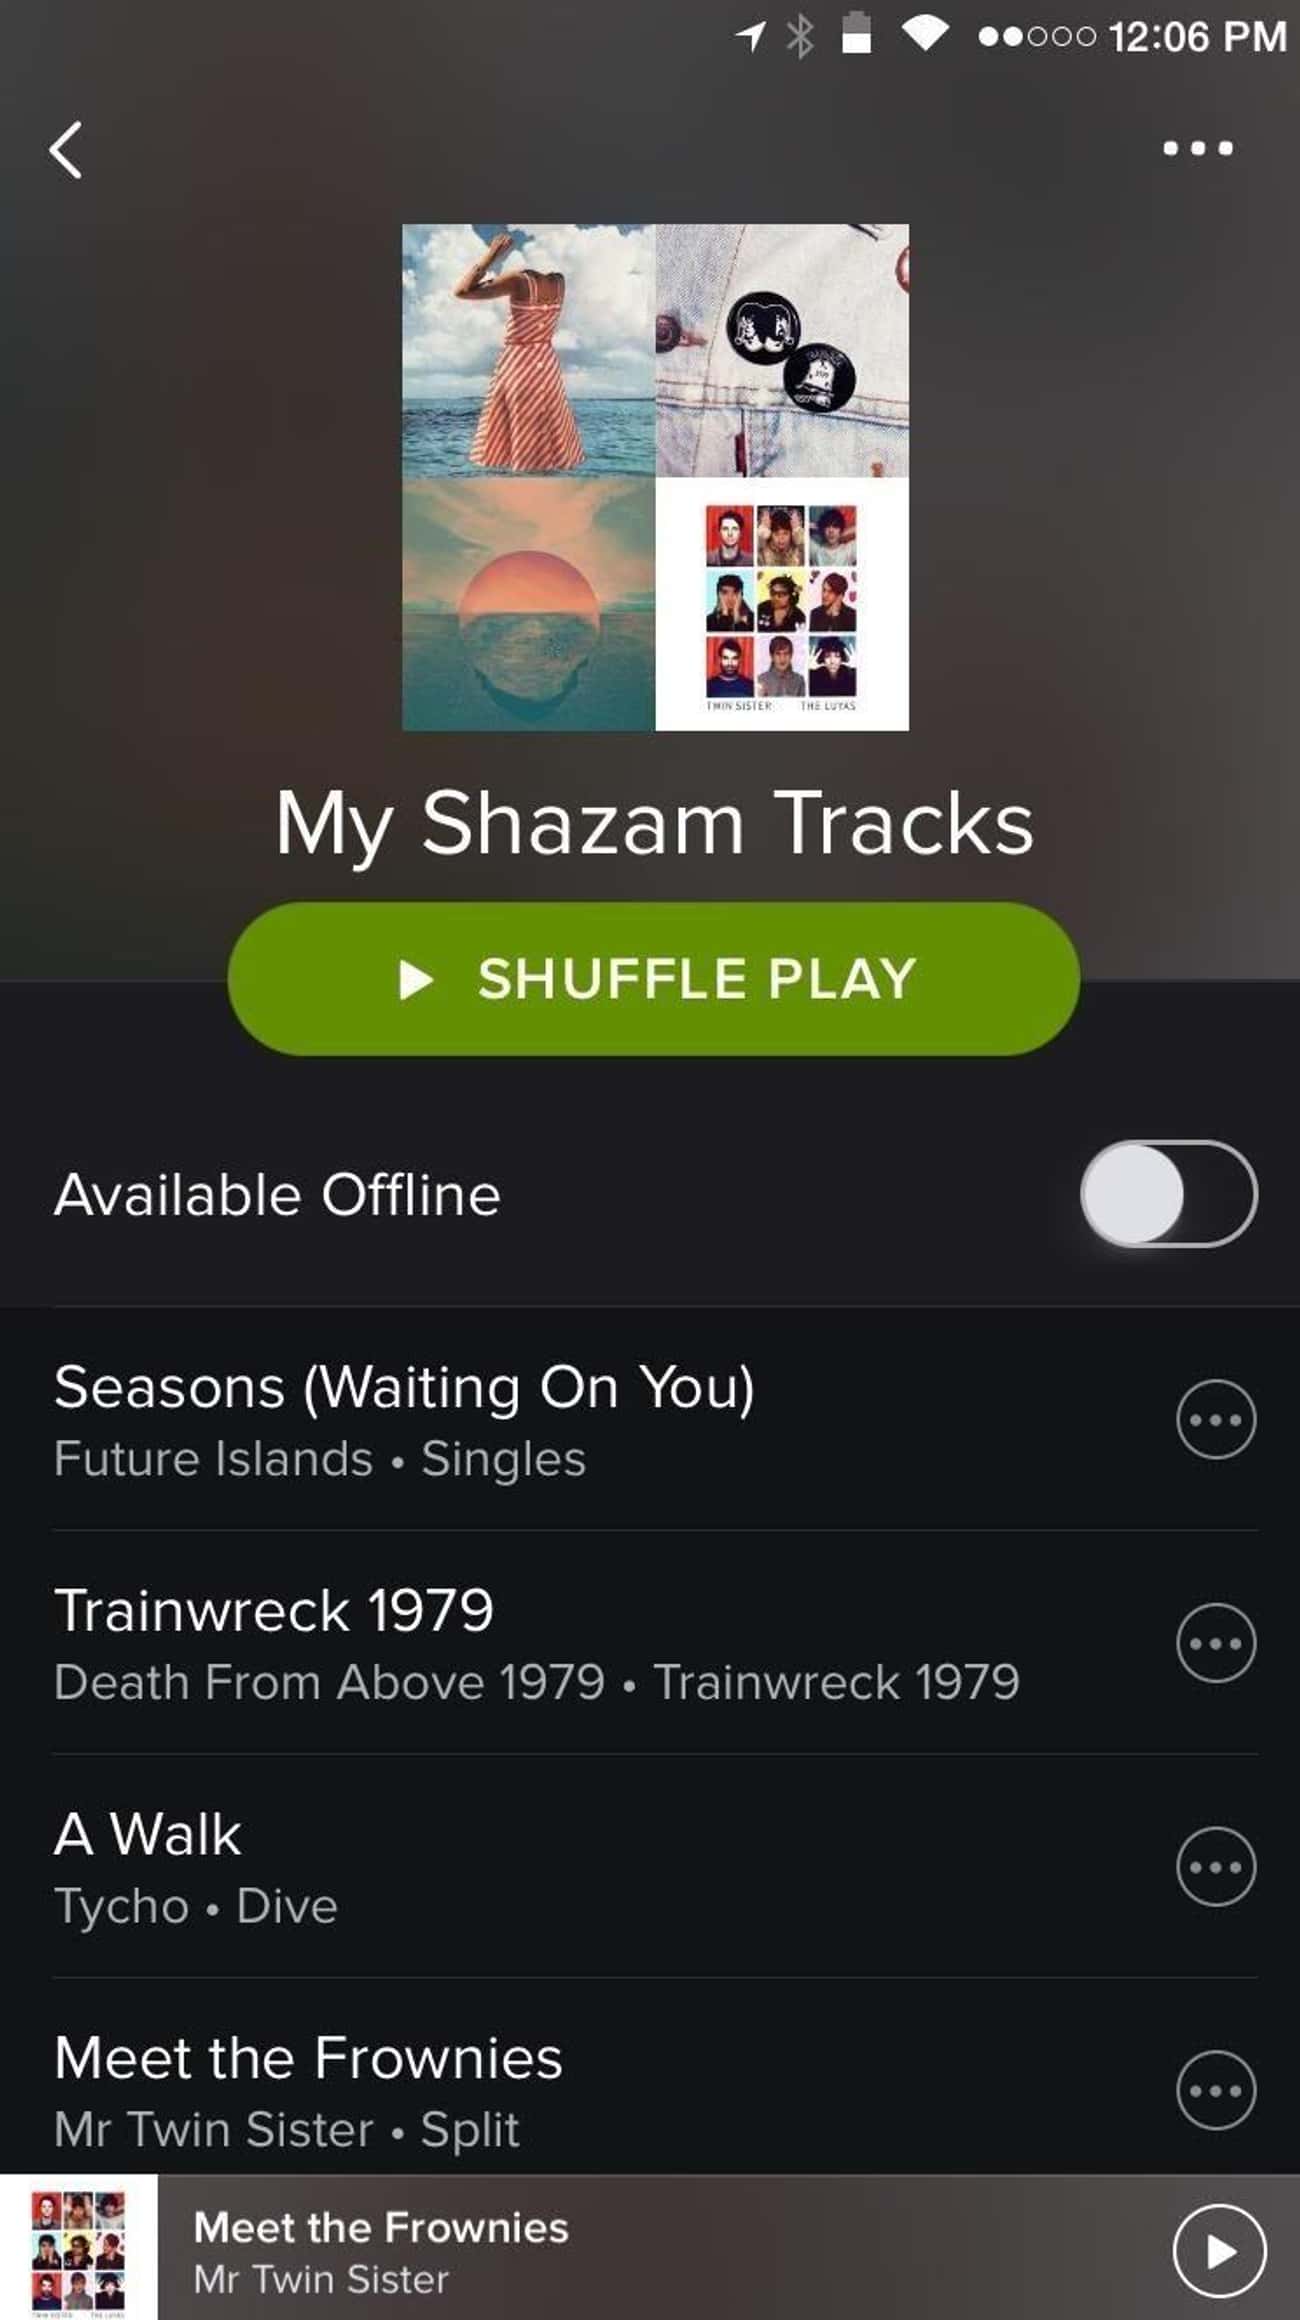 You Can Use Shazam In Conjunction With Spotify